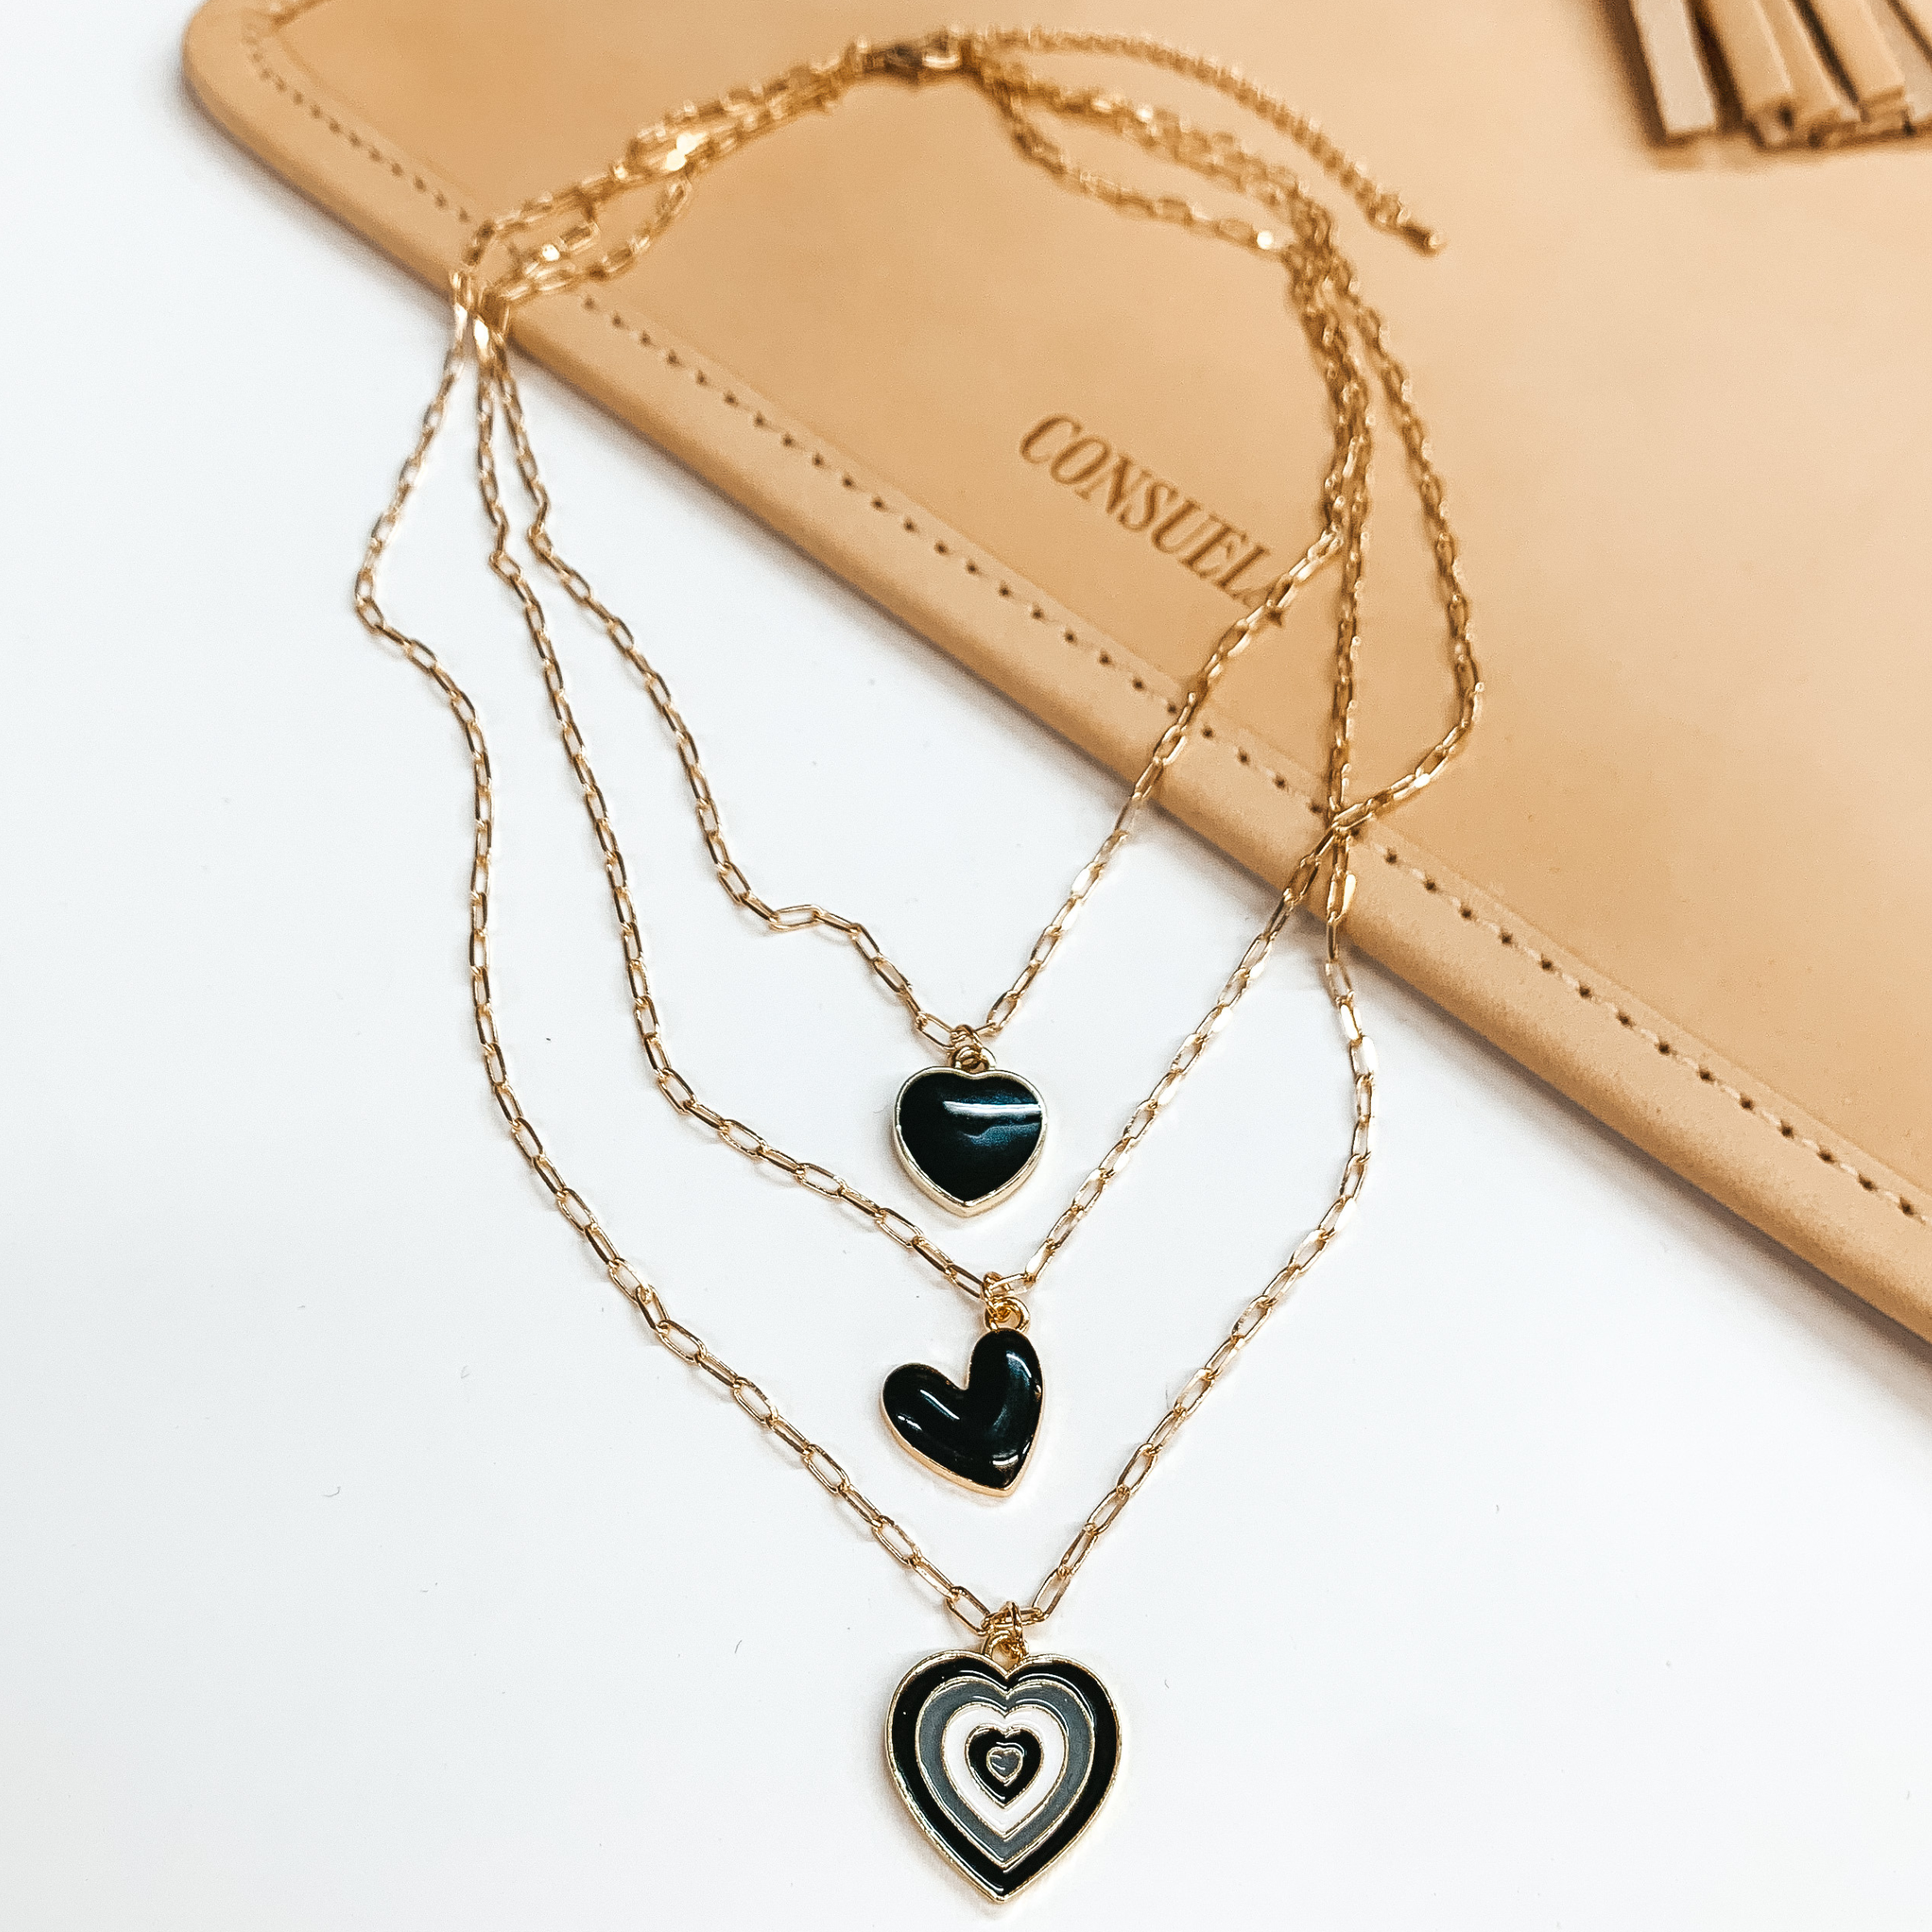 Three Strand Gold Multi Chain Necklace with Black and White Heart Charms - Giddy Up Glamour Boutique